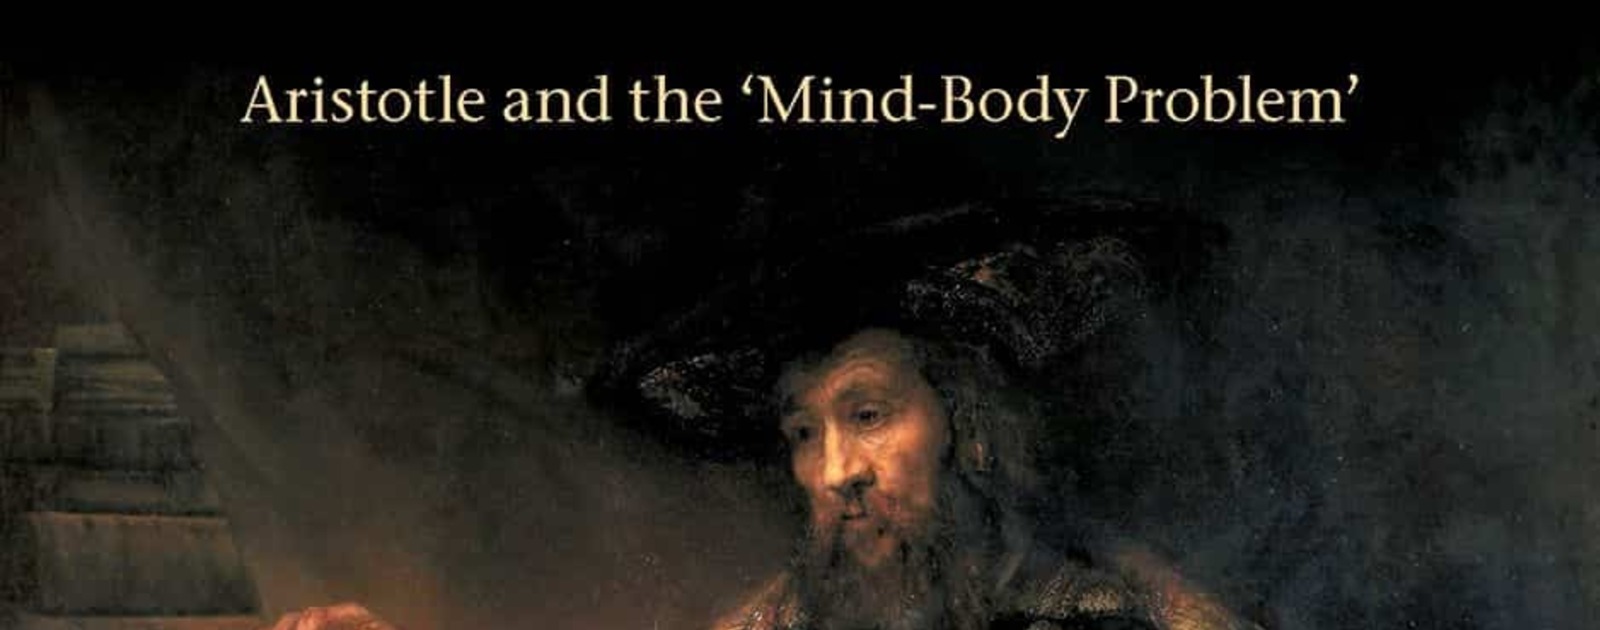 The Undivided Self: Aristotle and the ‘Mind-Body’ Problem